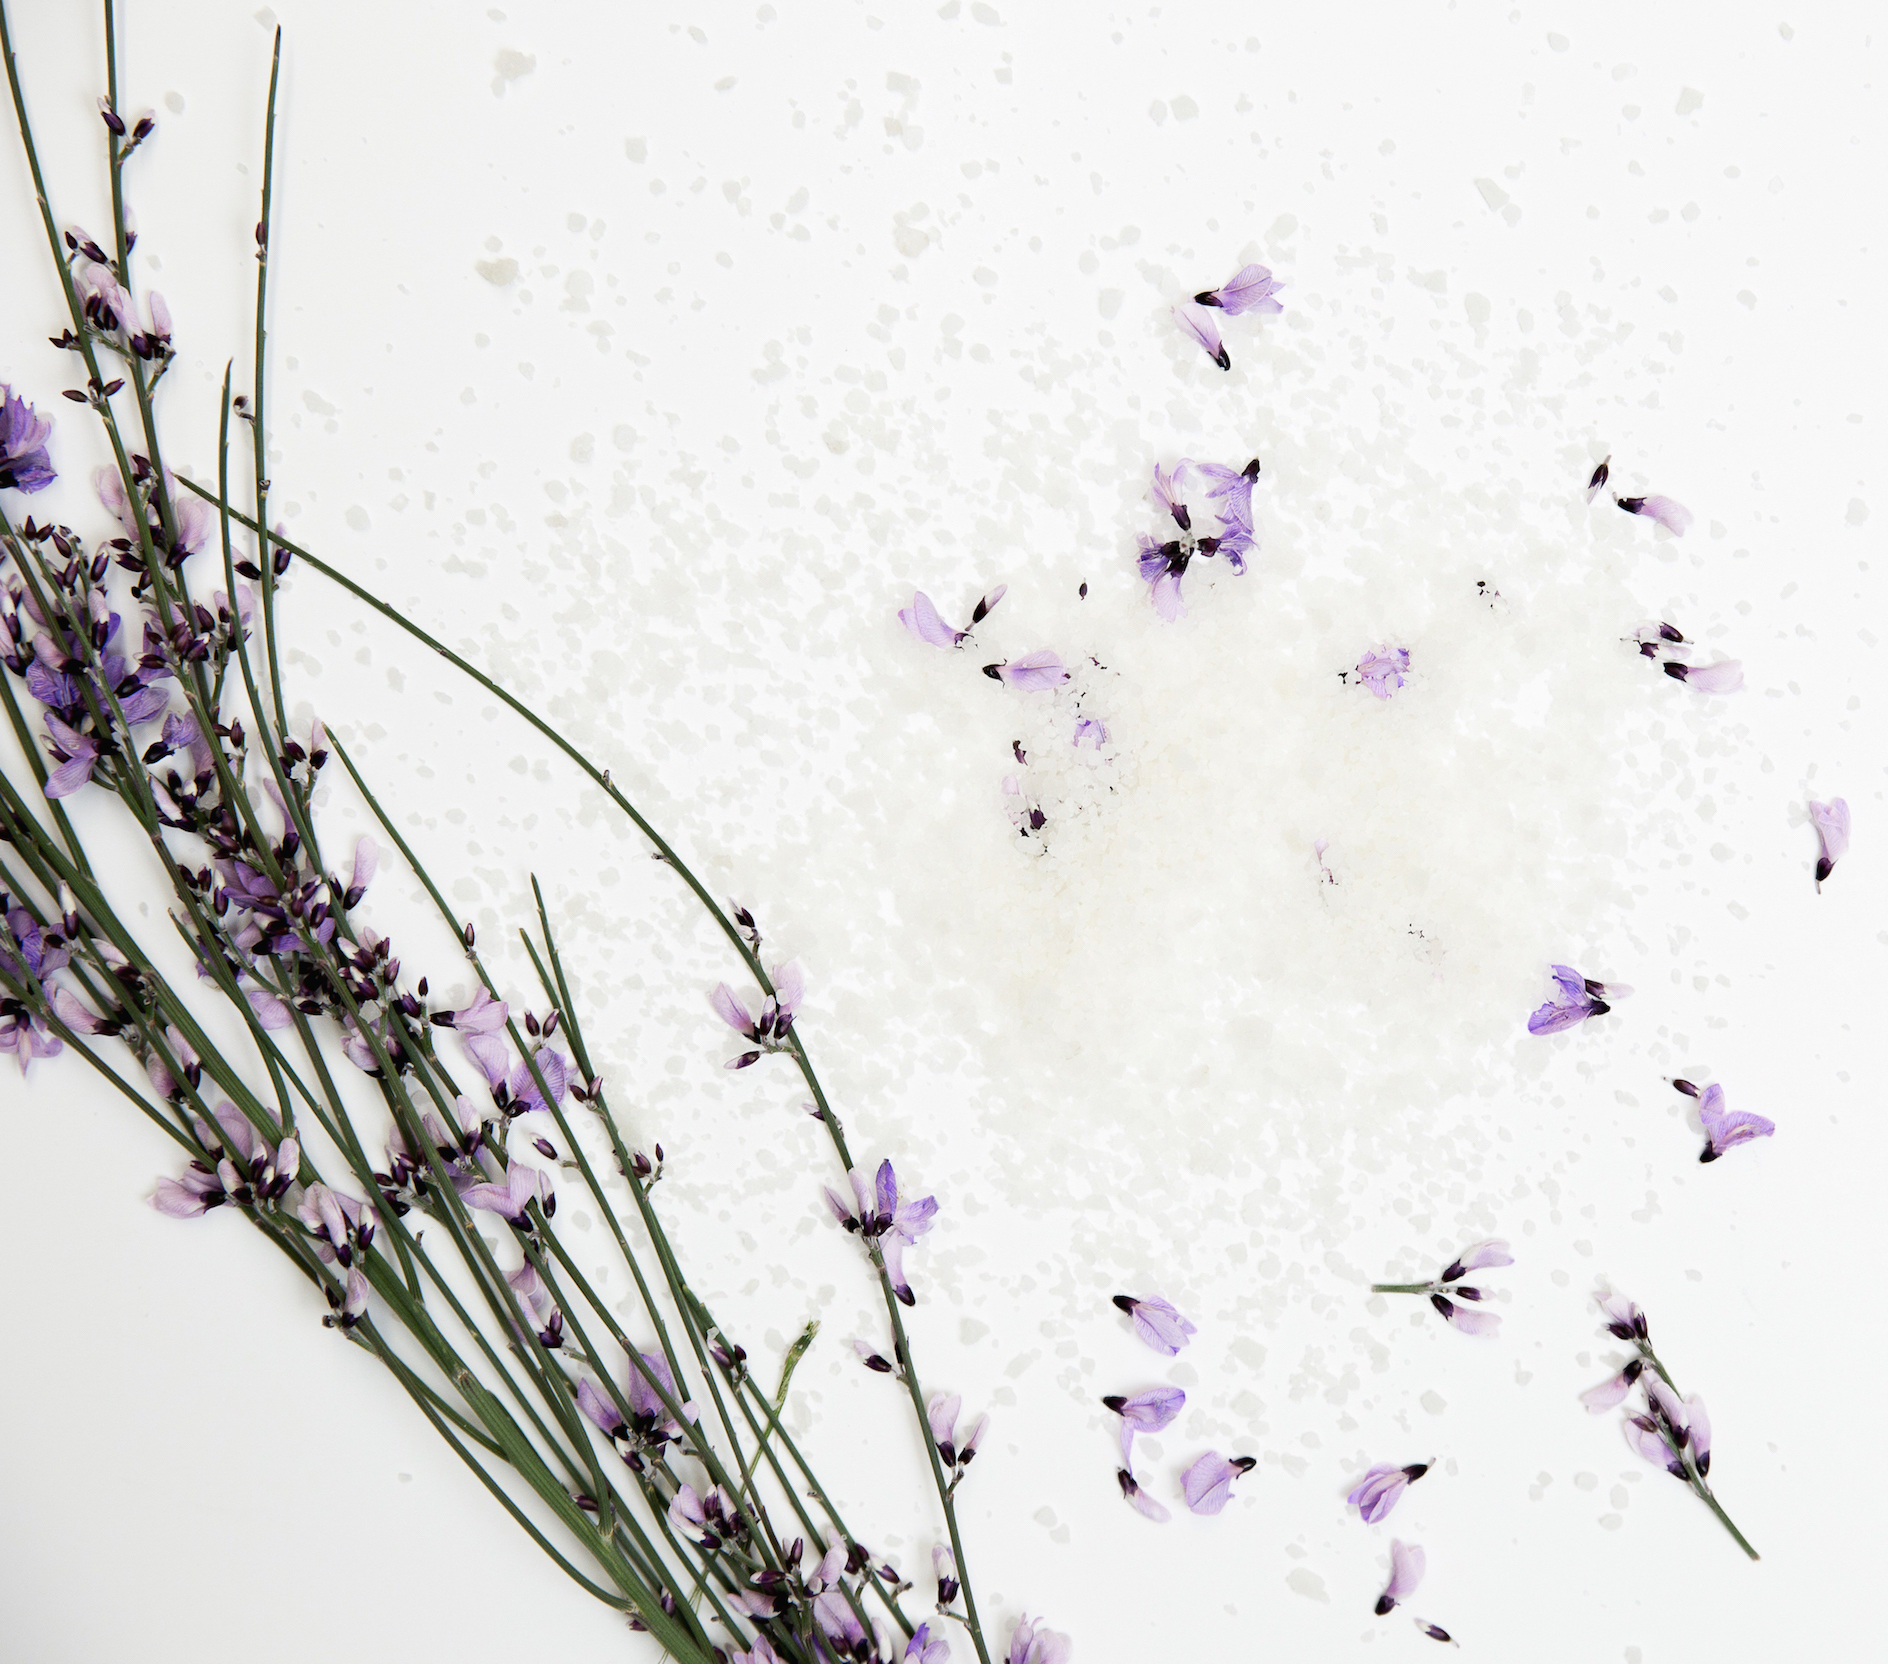 Lavender: Natural remedies for periods